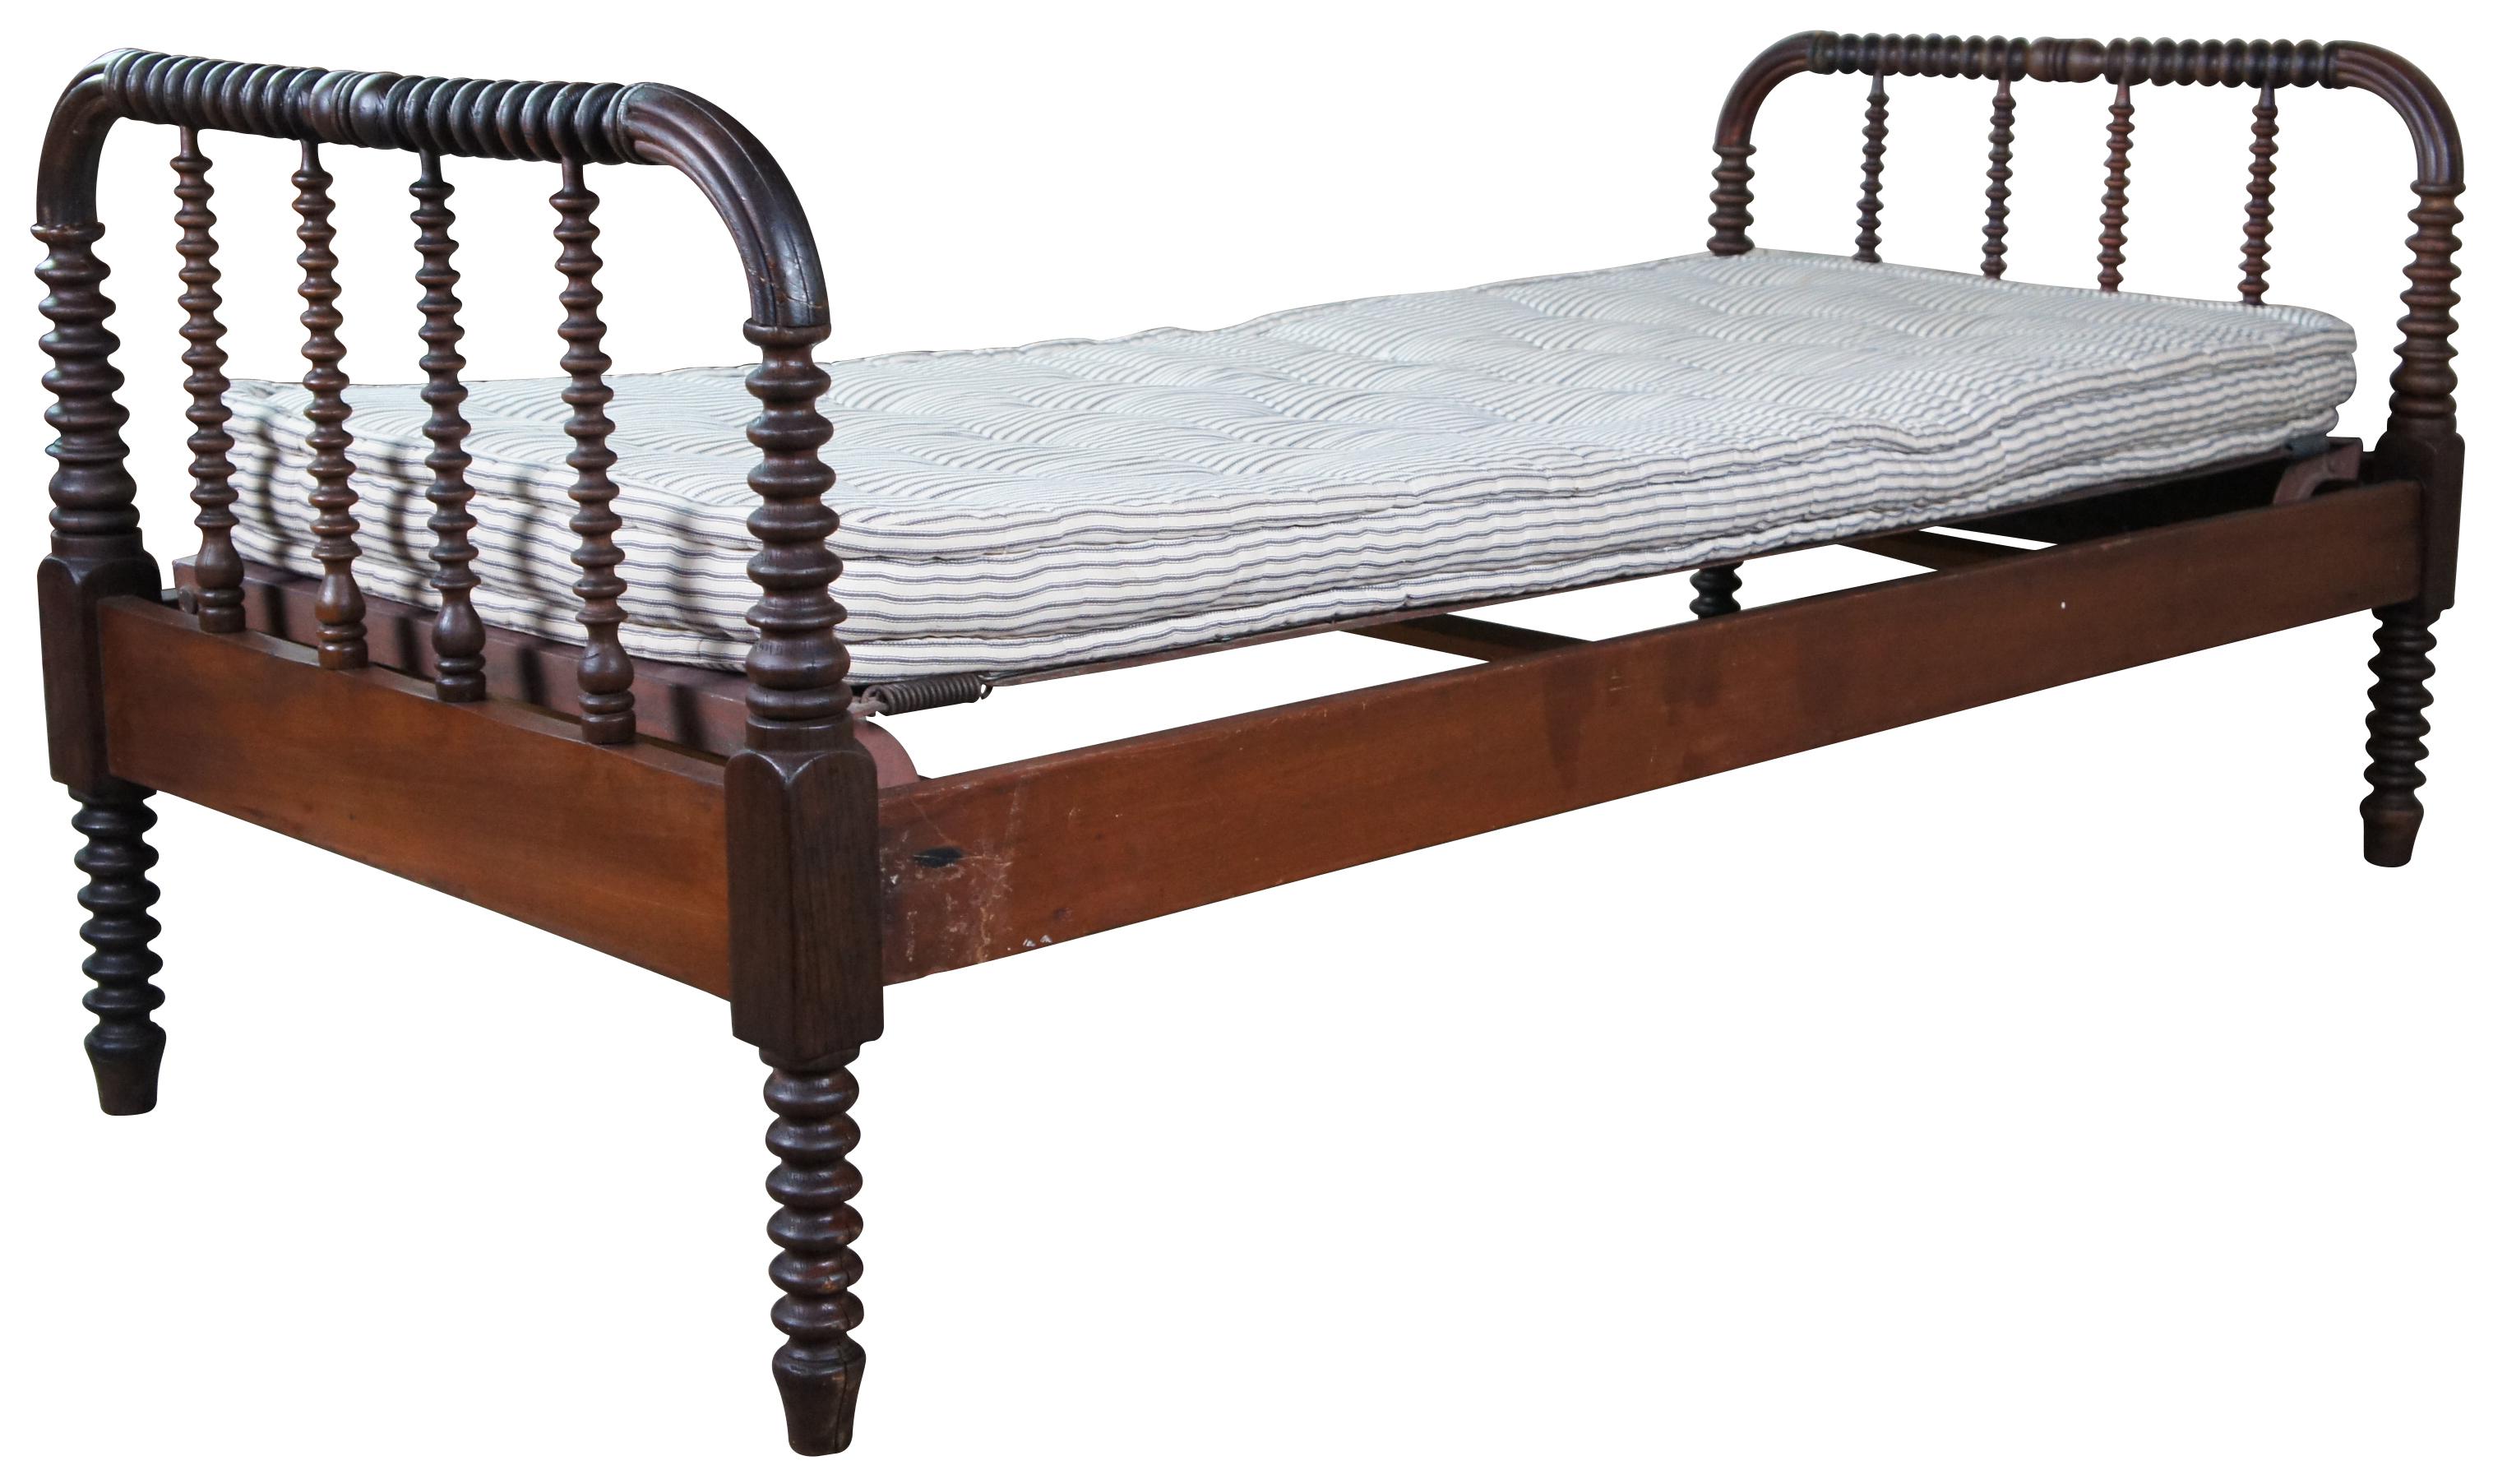 American country bed jenny lind bed. Made from walnut with spool turned posts and spindles. Includes custom springs and mattress.

Measures: 34.5